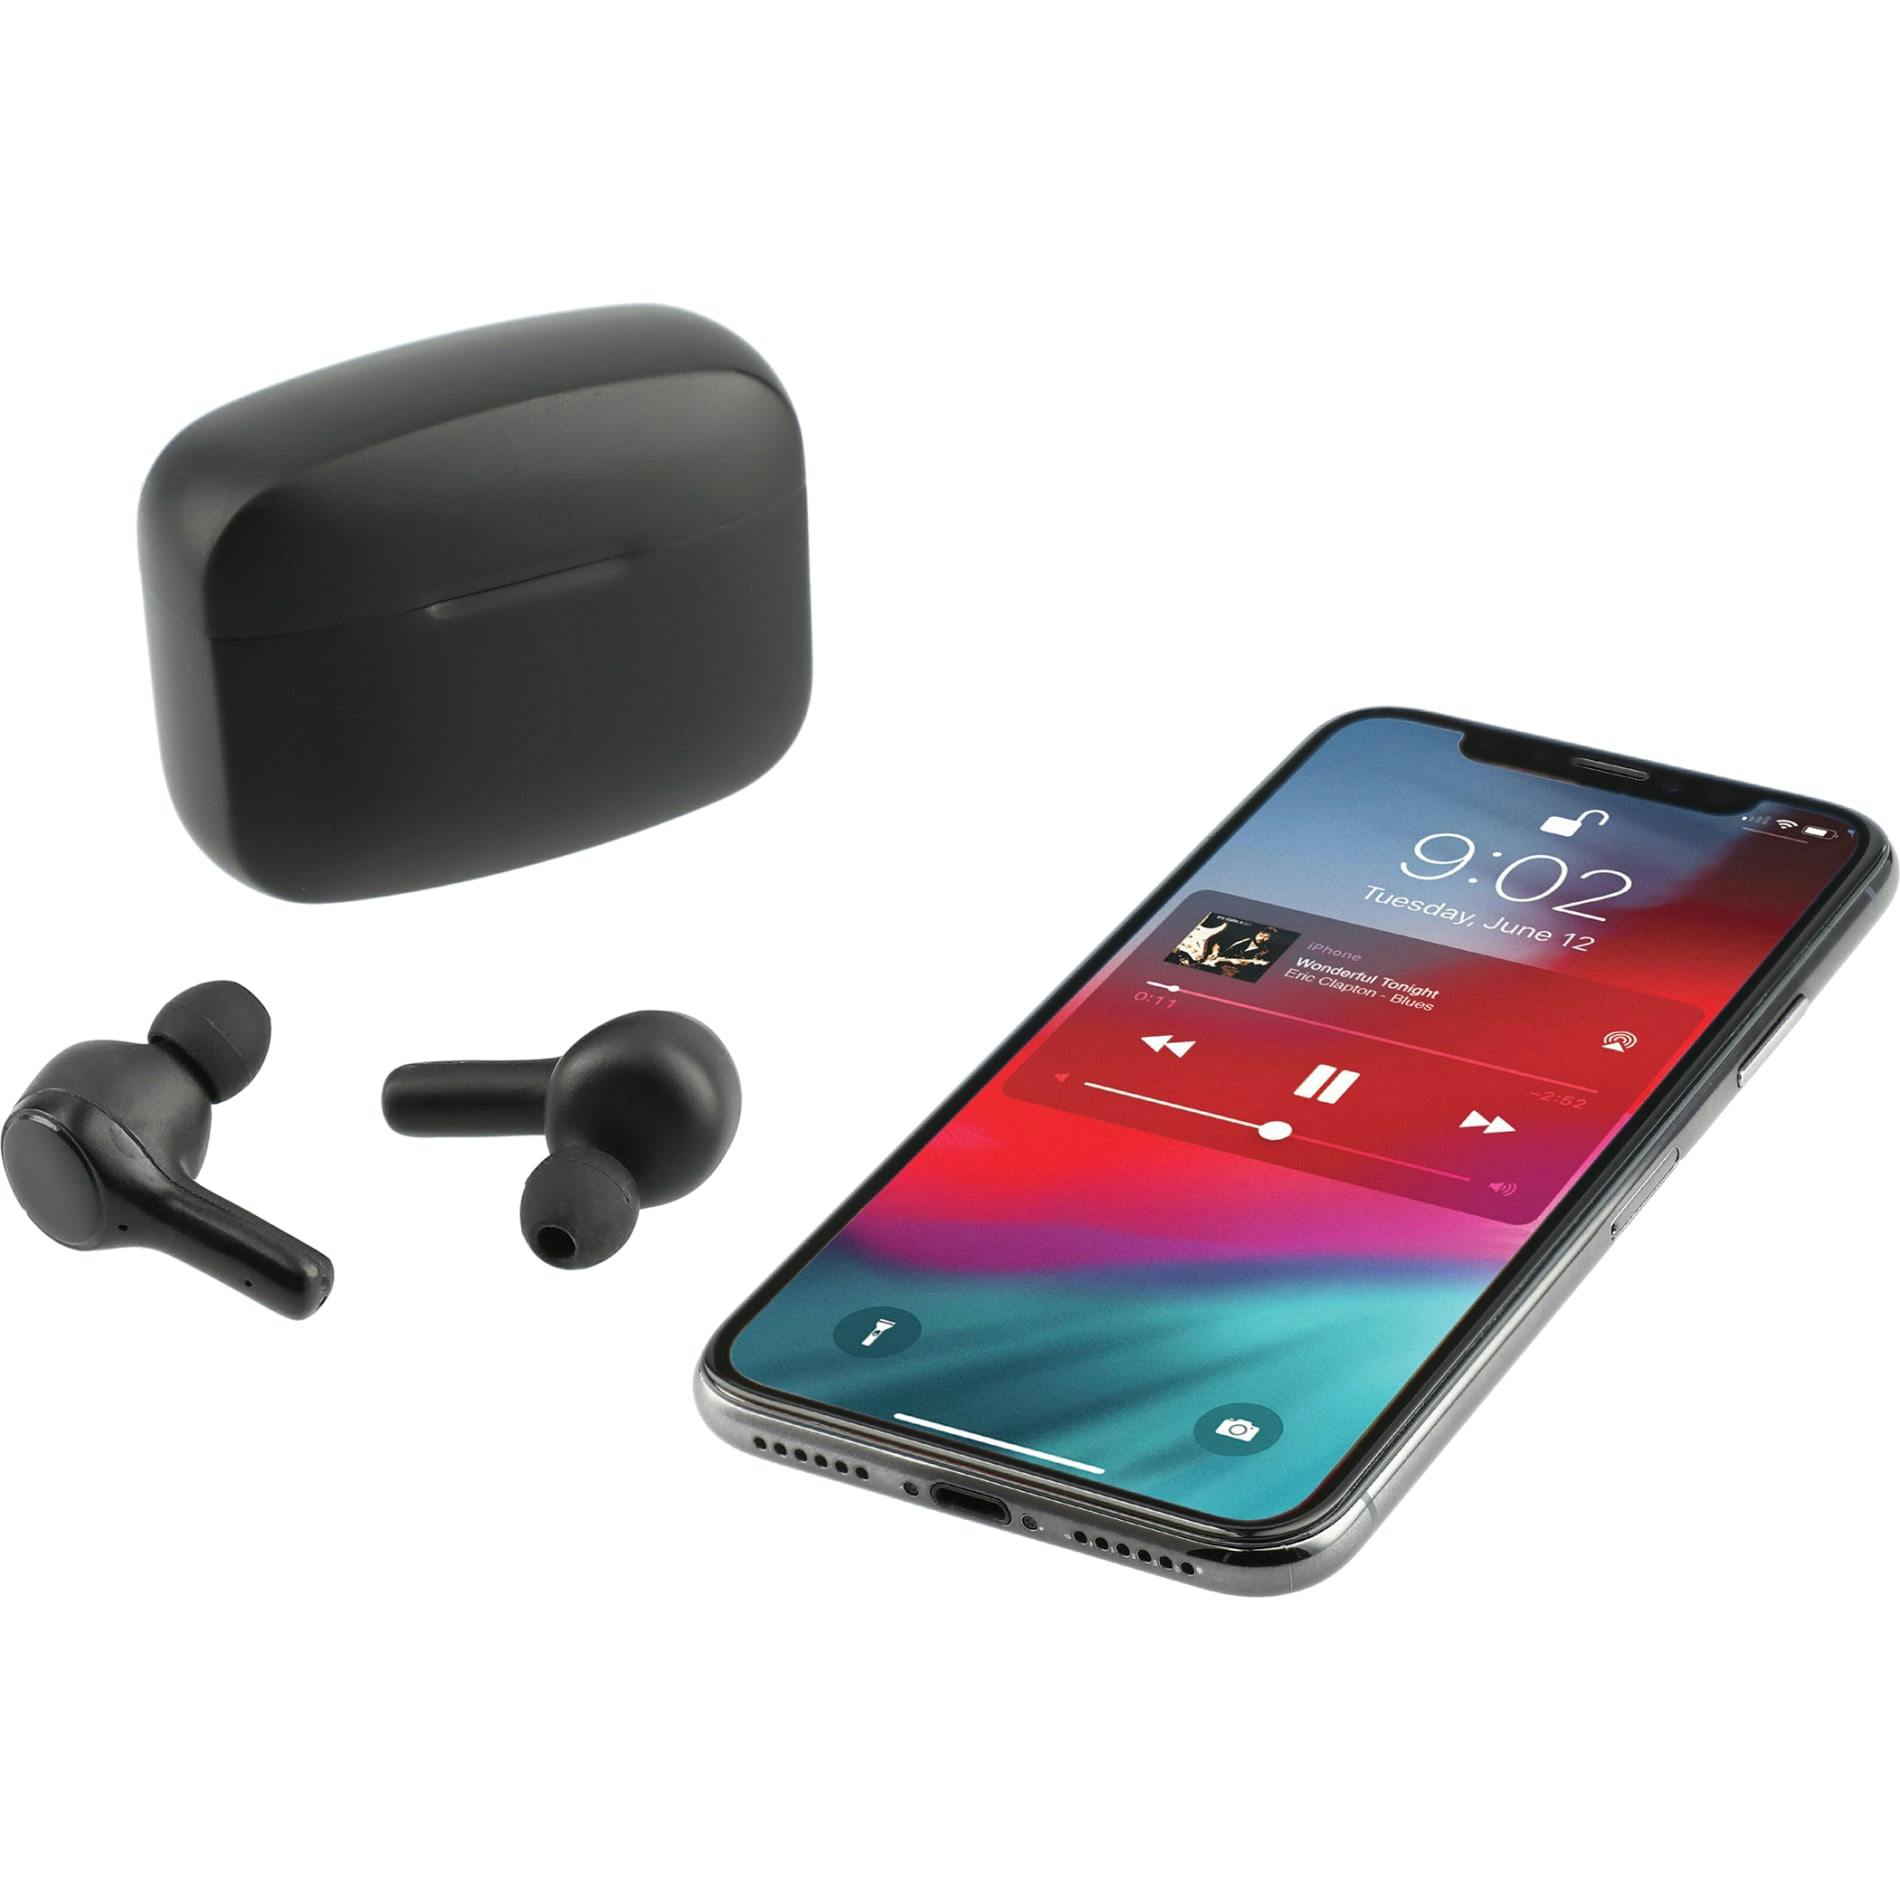 A'Ray True Wireless Auto Pair Earbuds with ANC. - additional Image 5